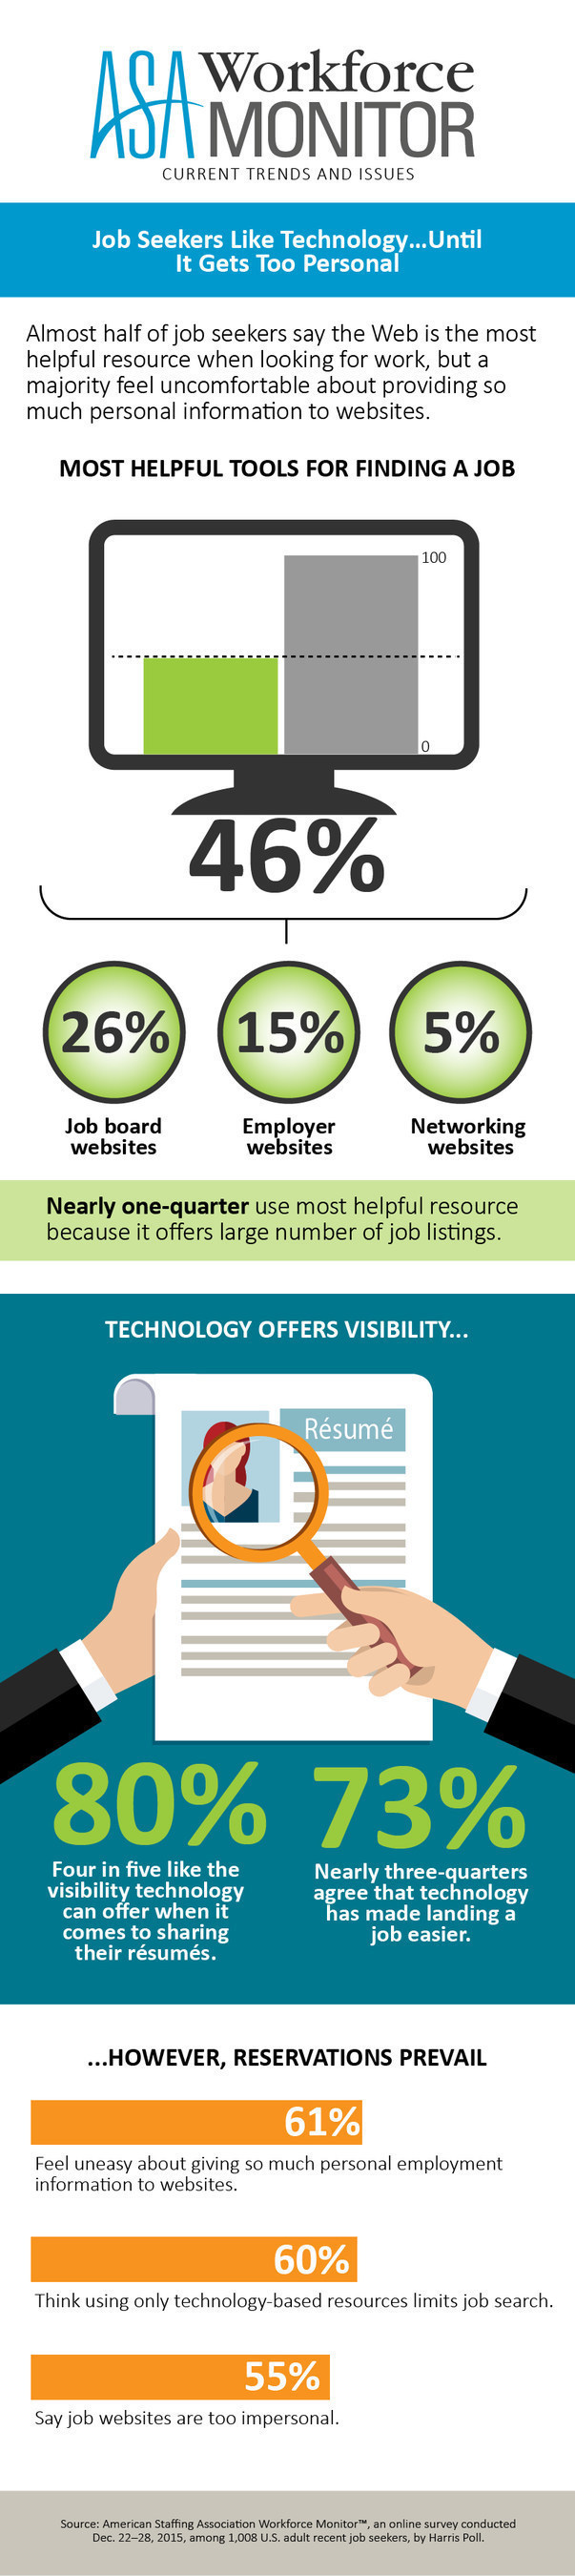 American Staffing Association Workforce Monitor: Job Seekers Like Technology...Until It Gets Too Personal